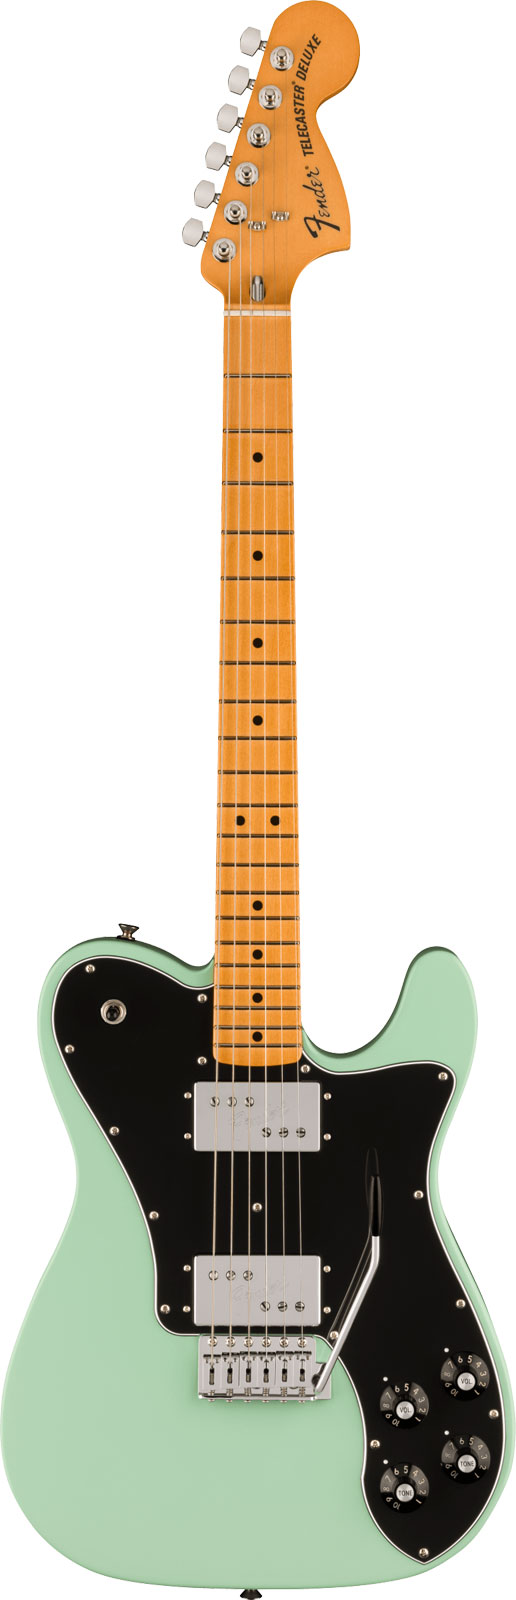 FENDER MEXICAN VINTERA II 70S TELECASTER DELUXE WITH TREMOLO MN SURF GREEN